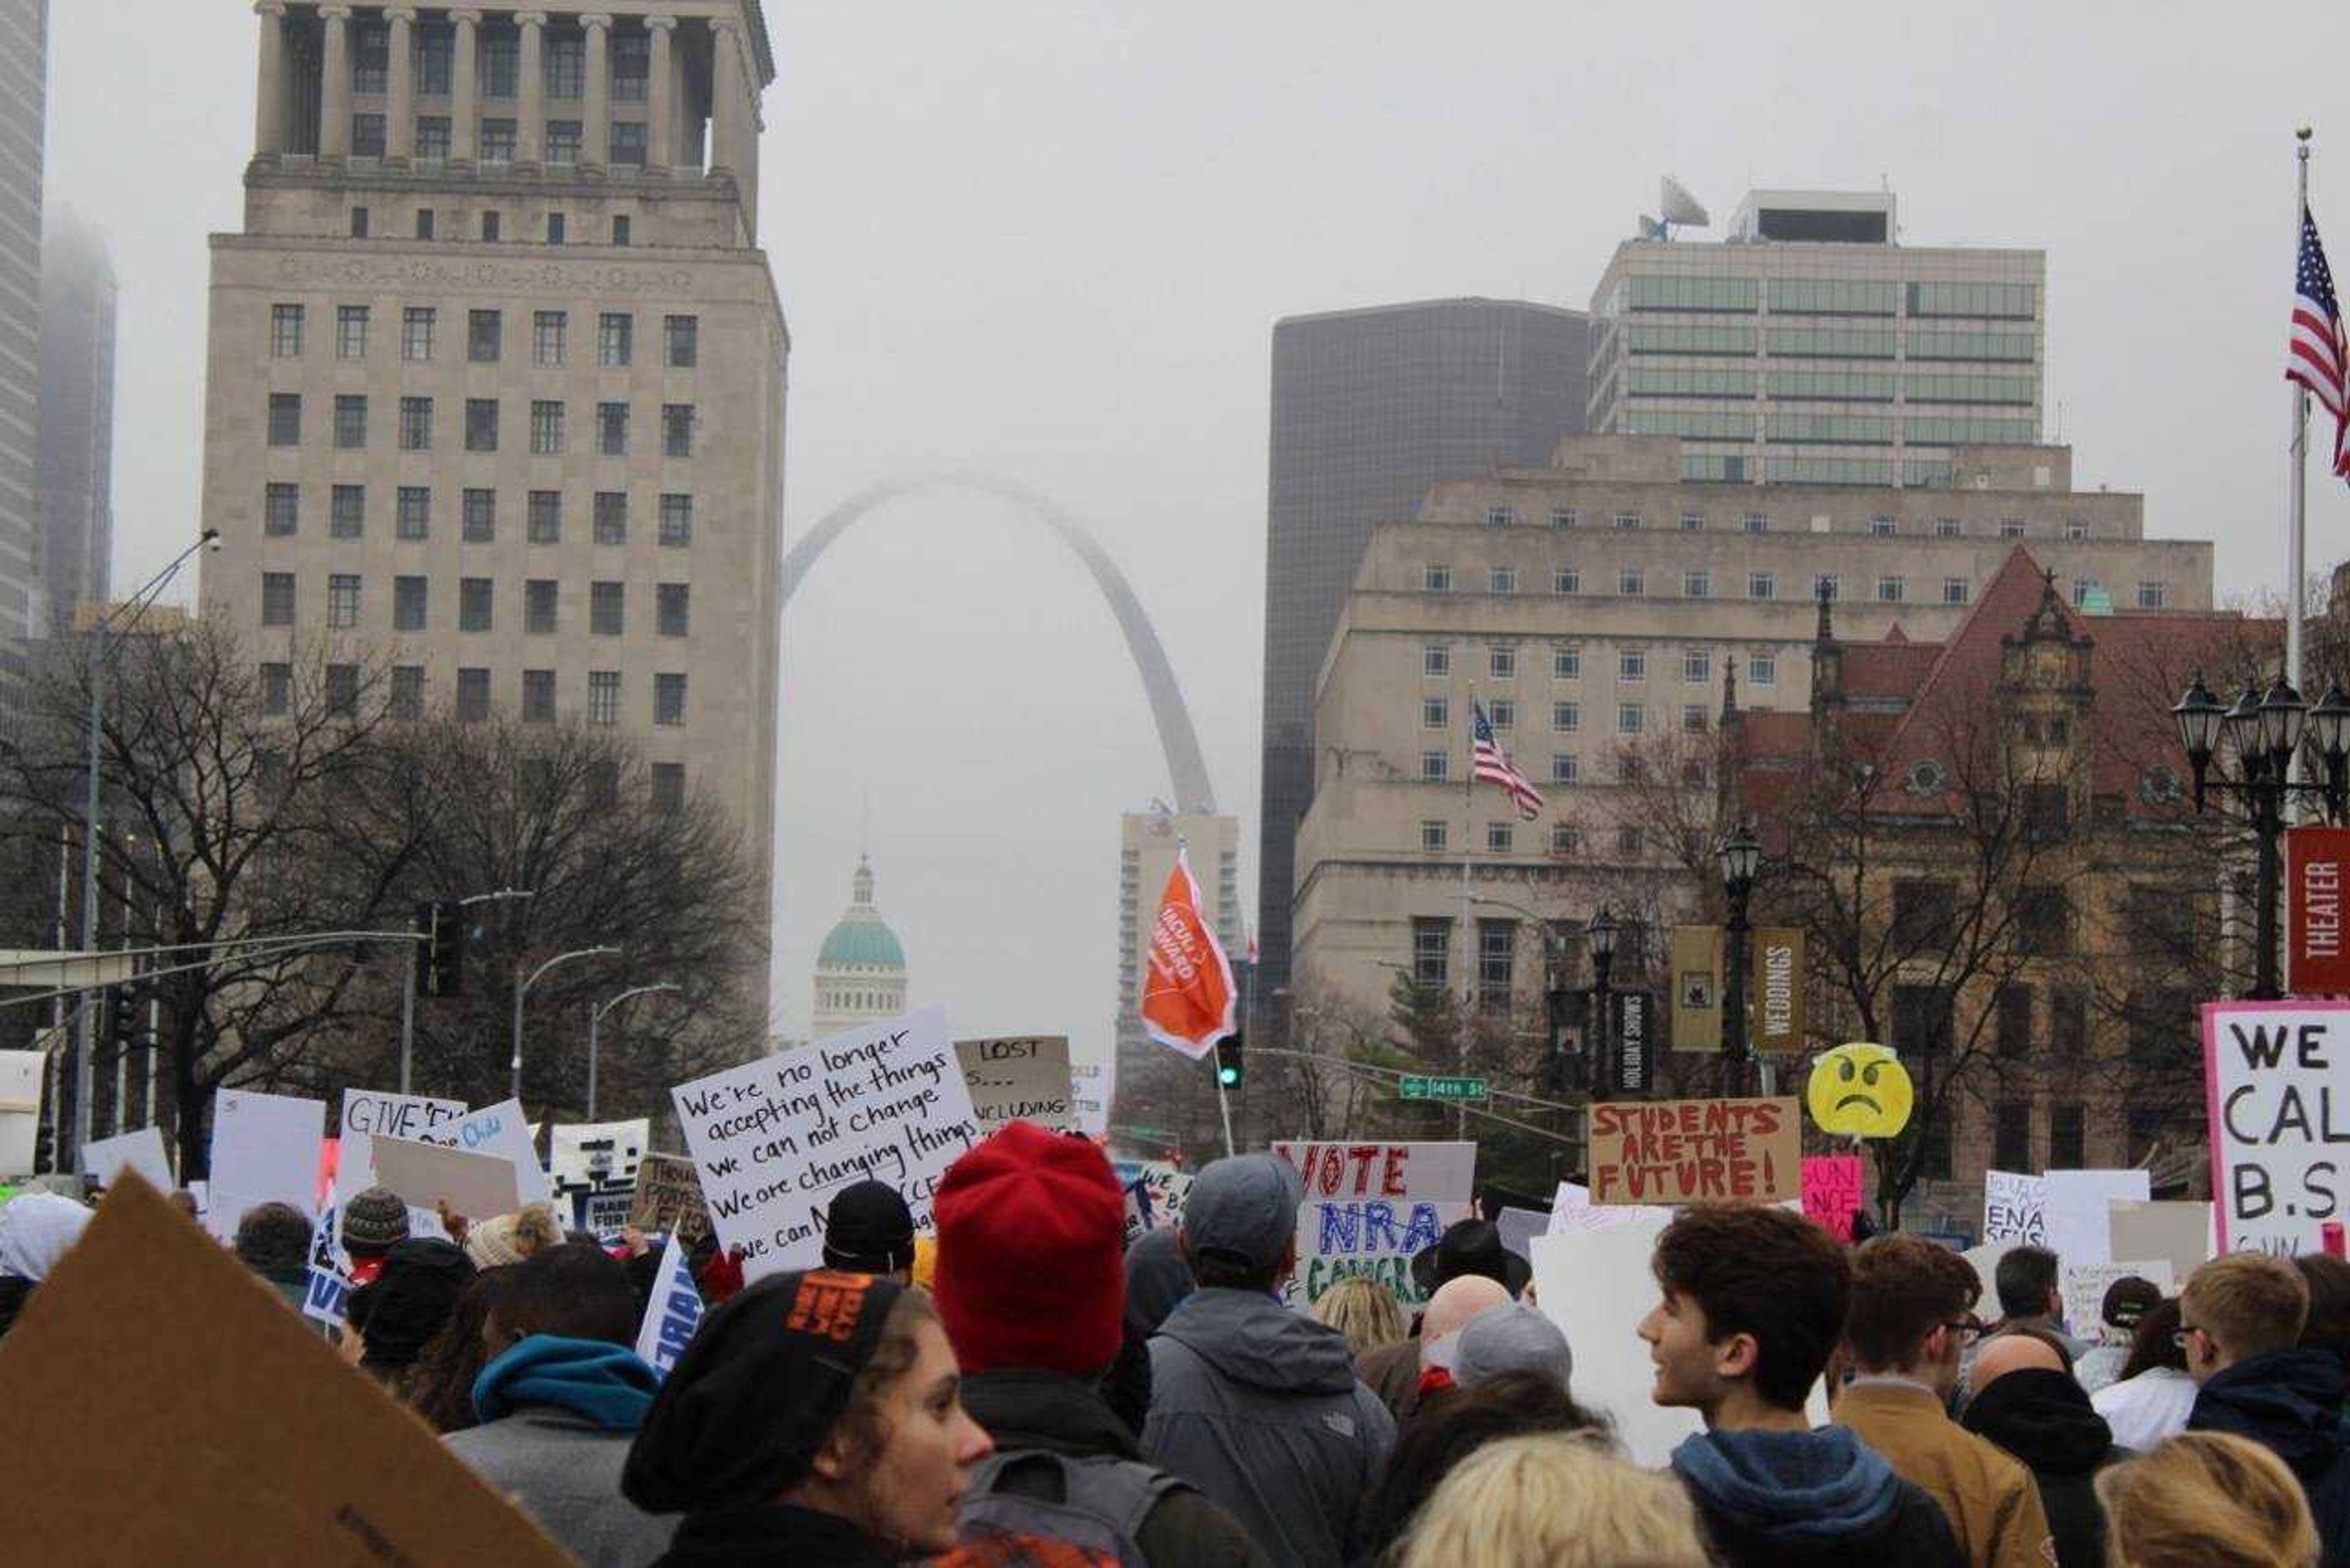 A scene from the Saint Louis March for Our Lives on March 24.